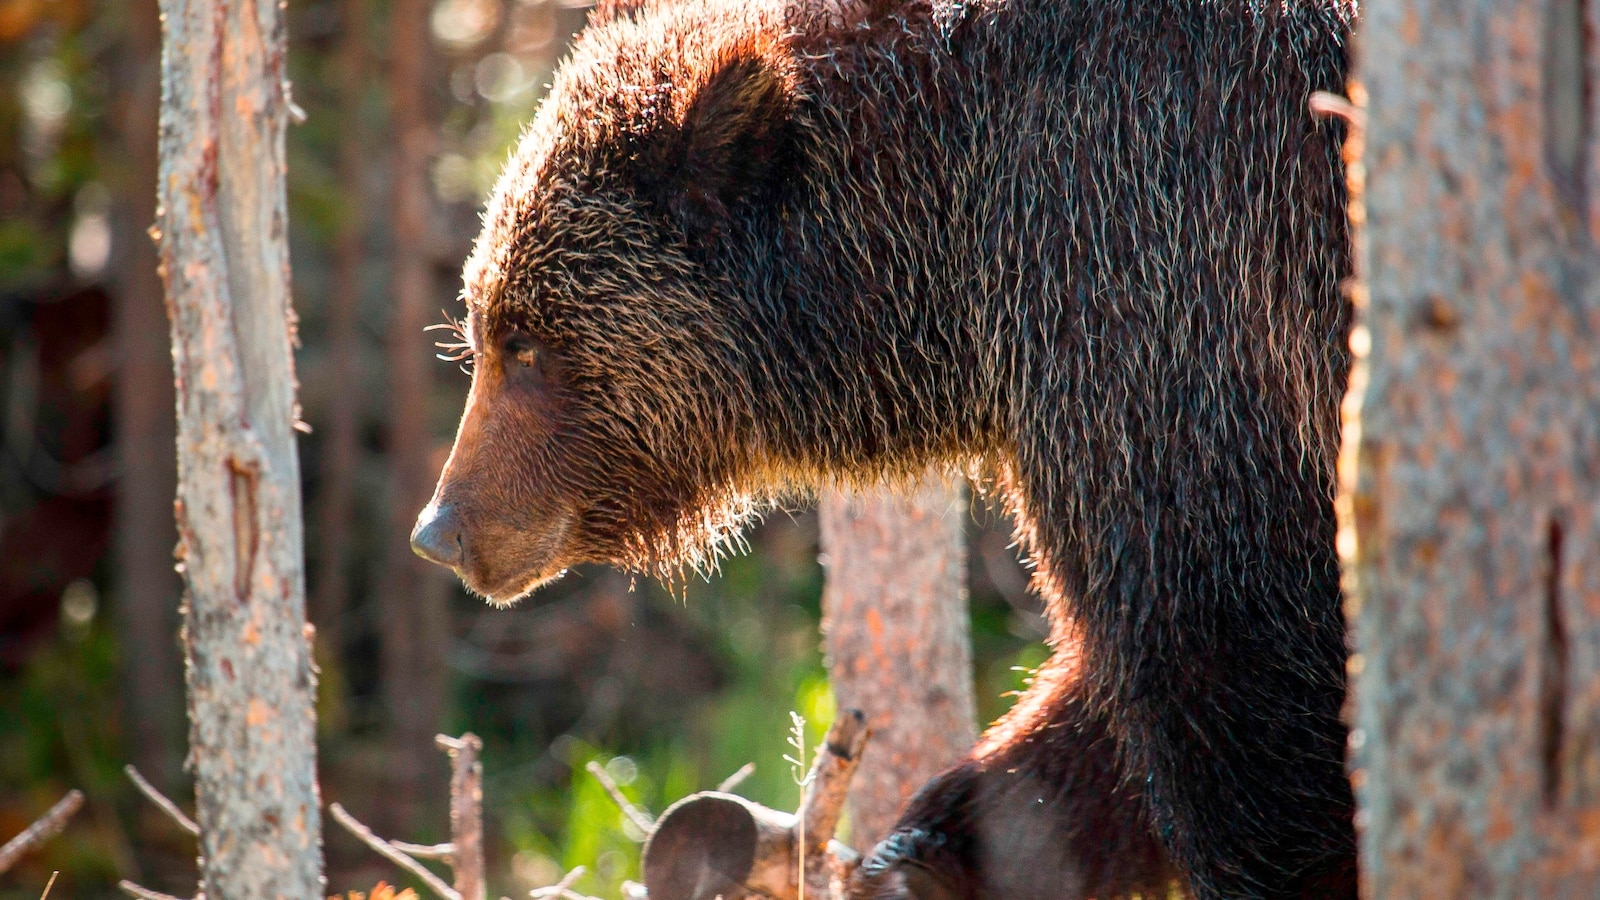 35-year-old man survives grizzly bear attack after encountering 2 at national park